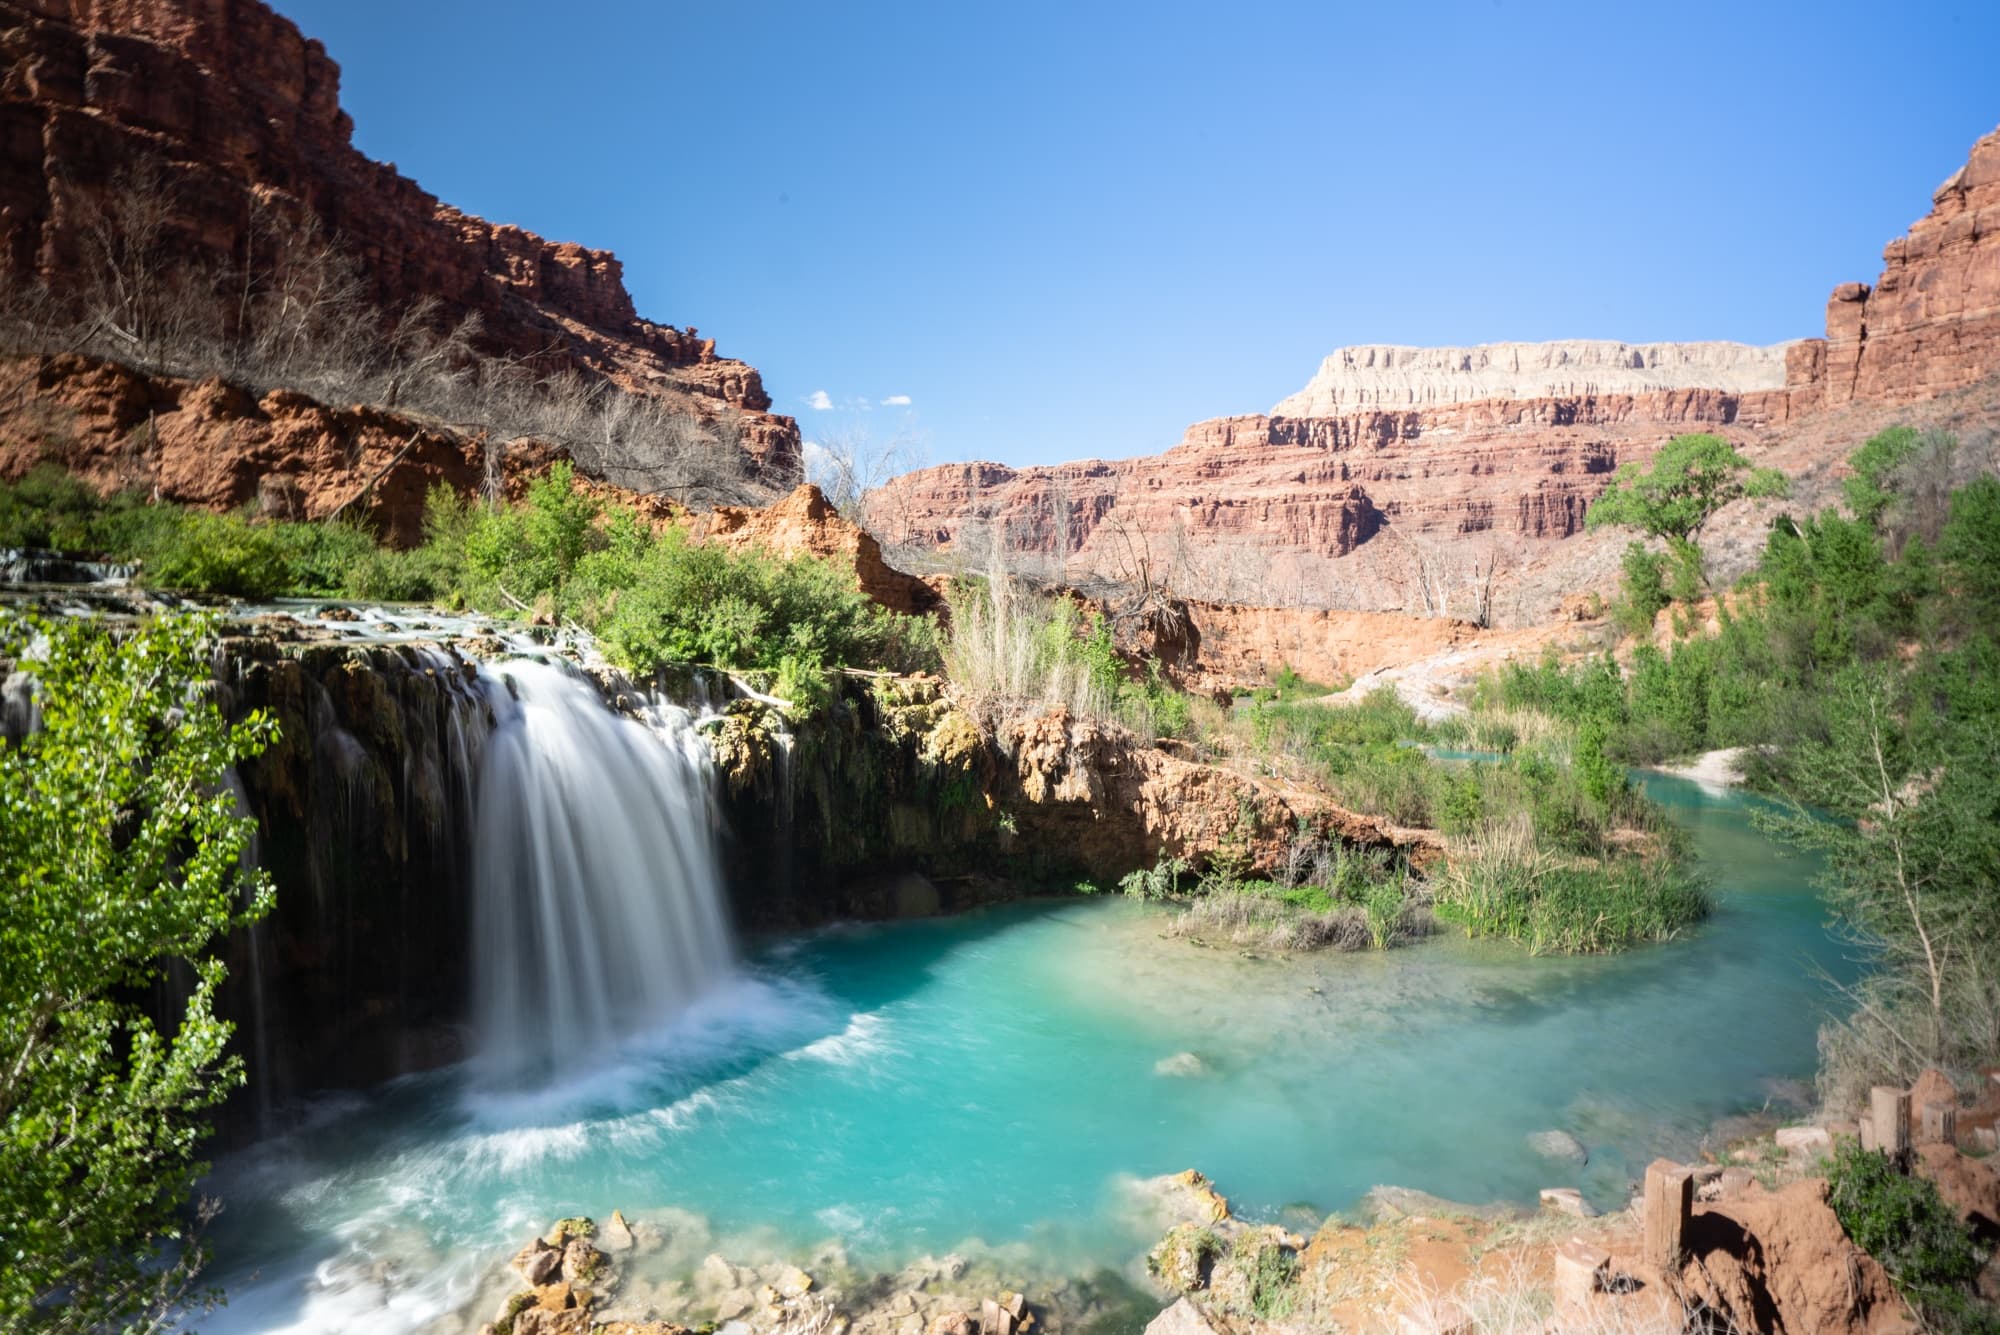 Get inspired to visit Havasupai in Arizona! Here are my favorite Havasu Falls photos along with tips and advice for planning your backpacking trip.